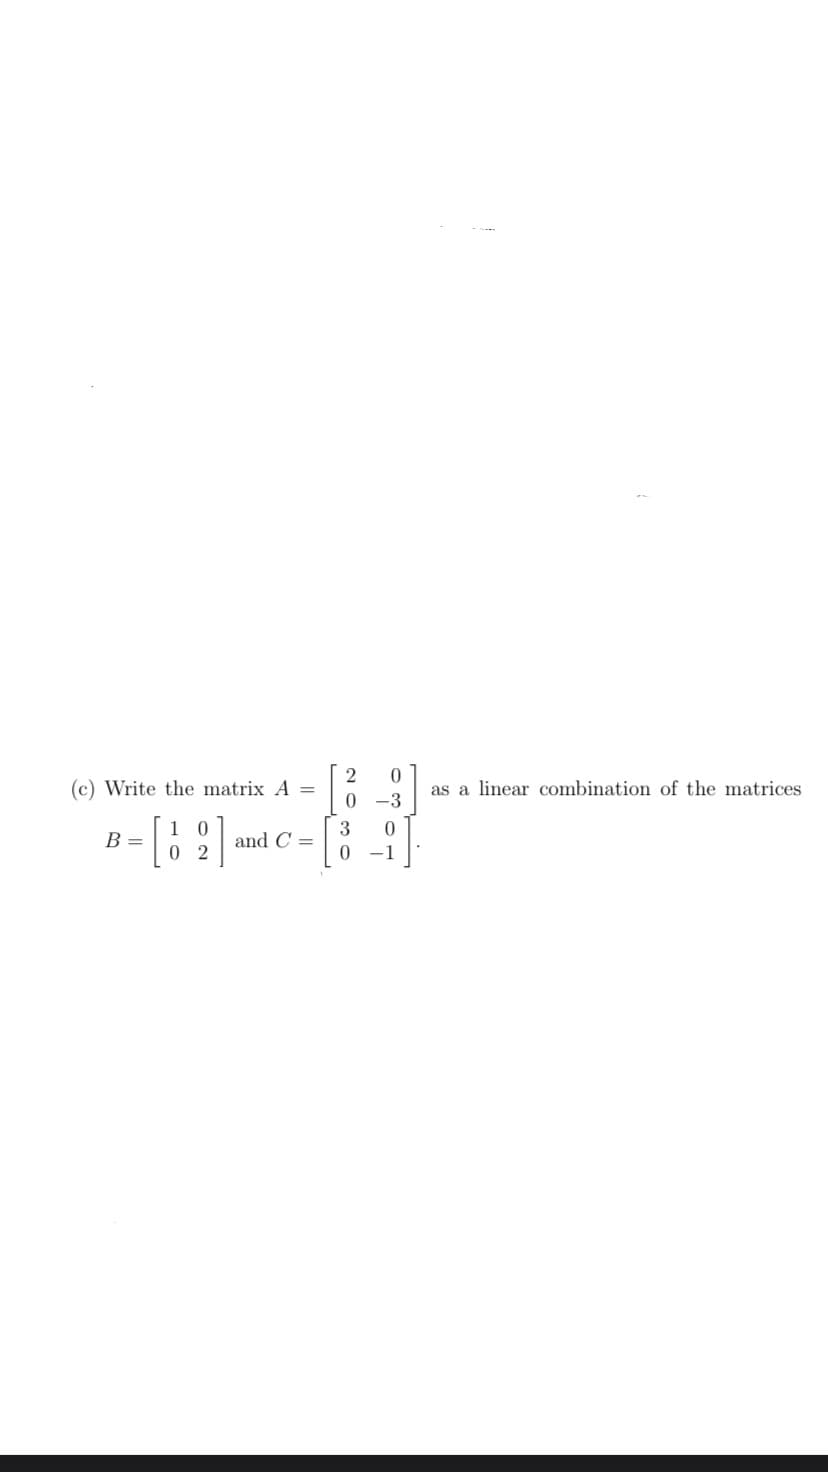 2
0
(c) Write the matrix A =
as a linear combination of the matrices
0
-3
B =
10
02
3
0
and C
0
-
1